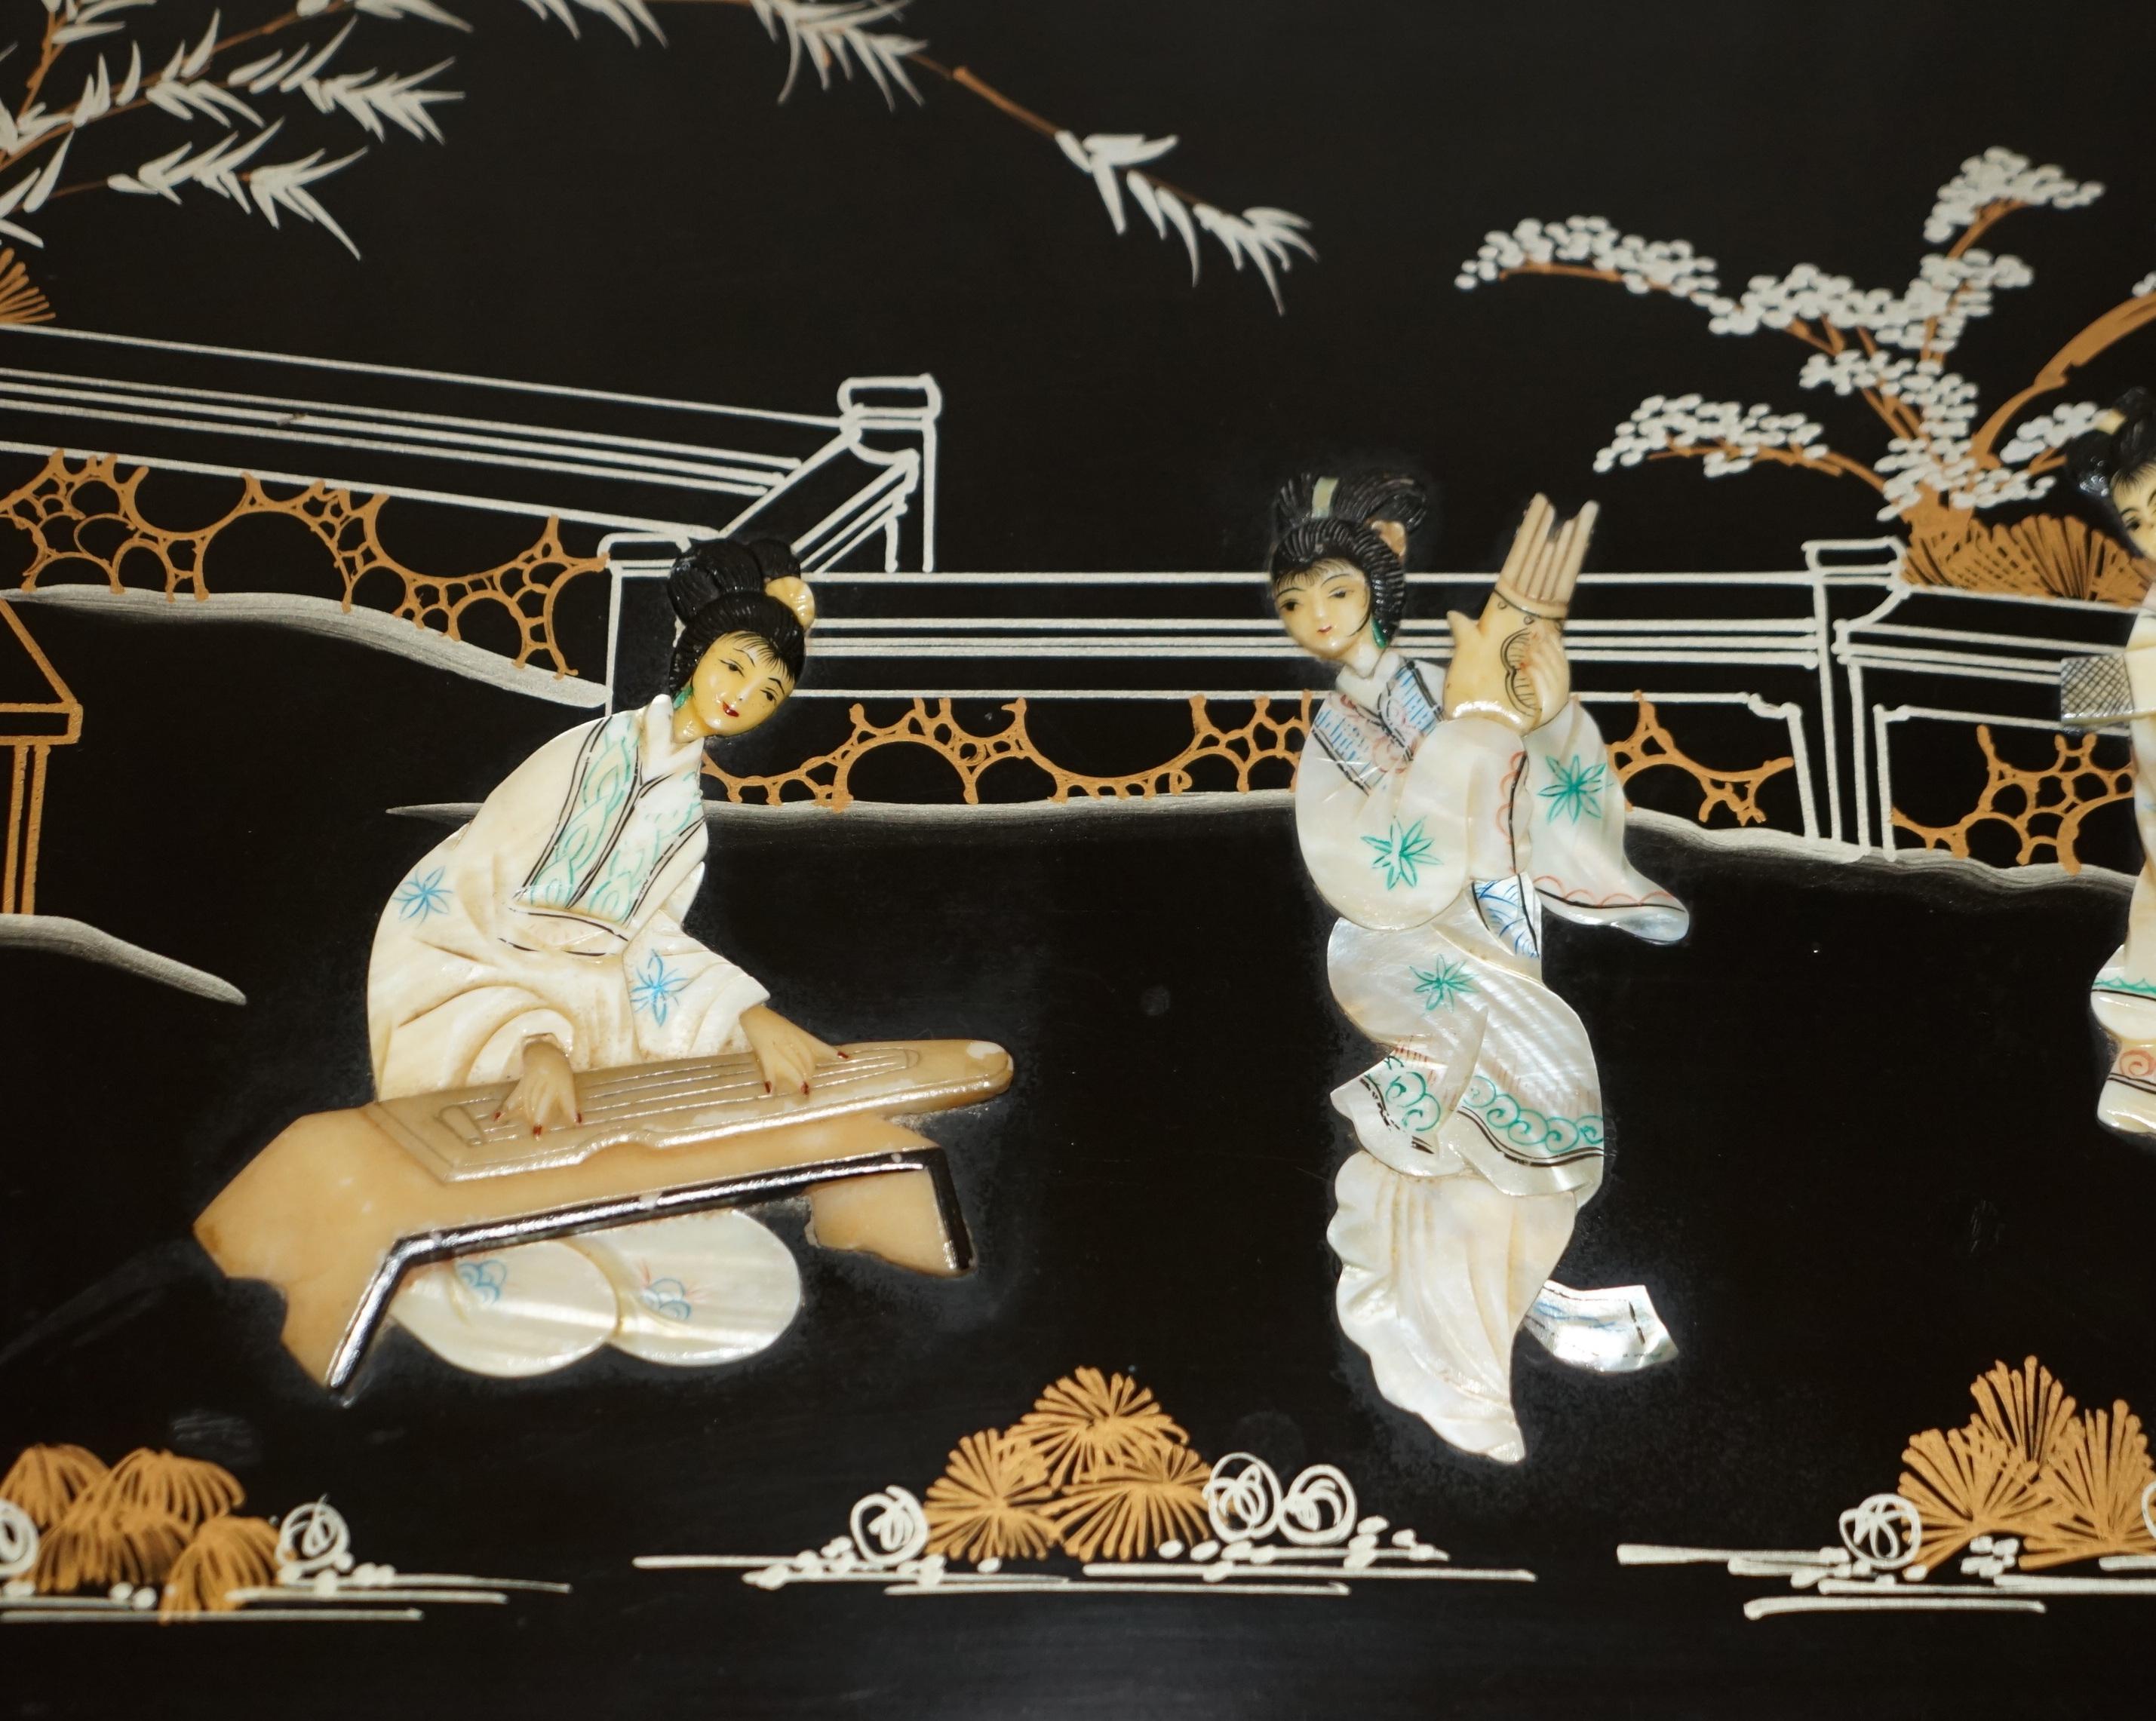 Stunning CHINOISERIE GEISHA GIRLS LACQUER SiDE CABINET SOAPSTONE en vente 4